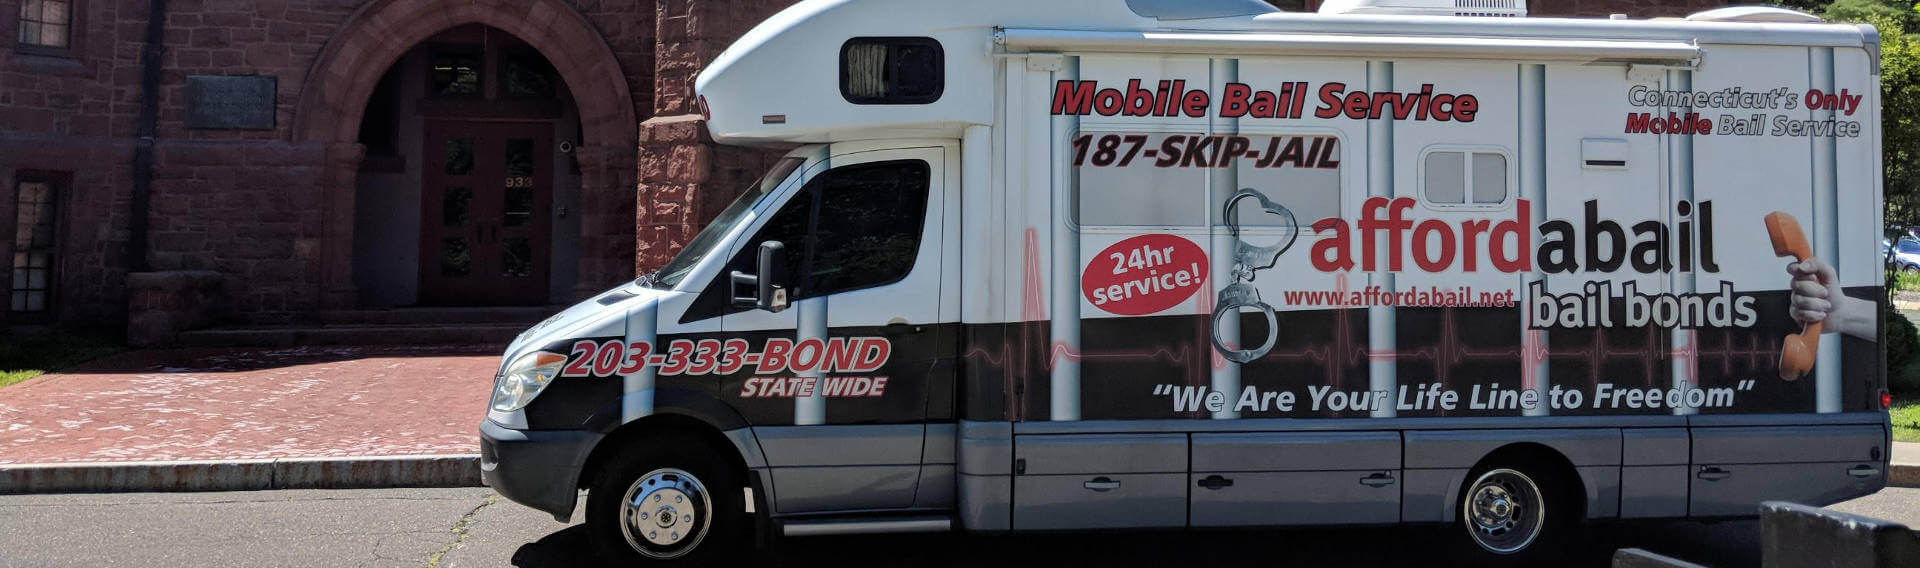 Mobile bail bonds service in Wallingford CT